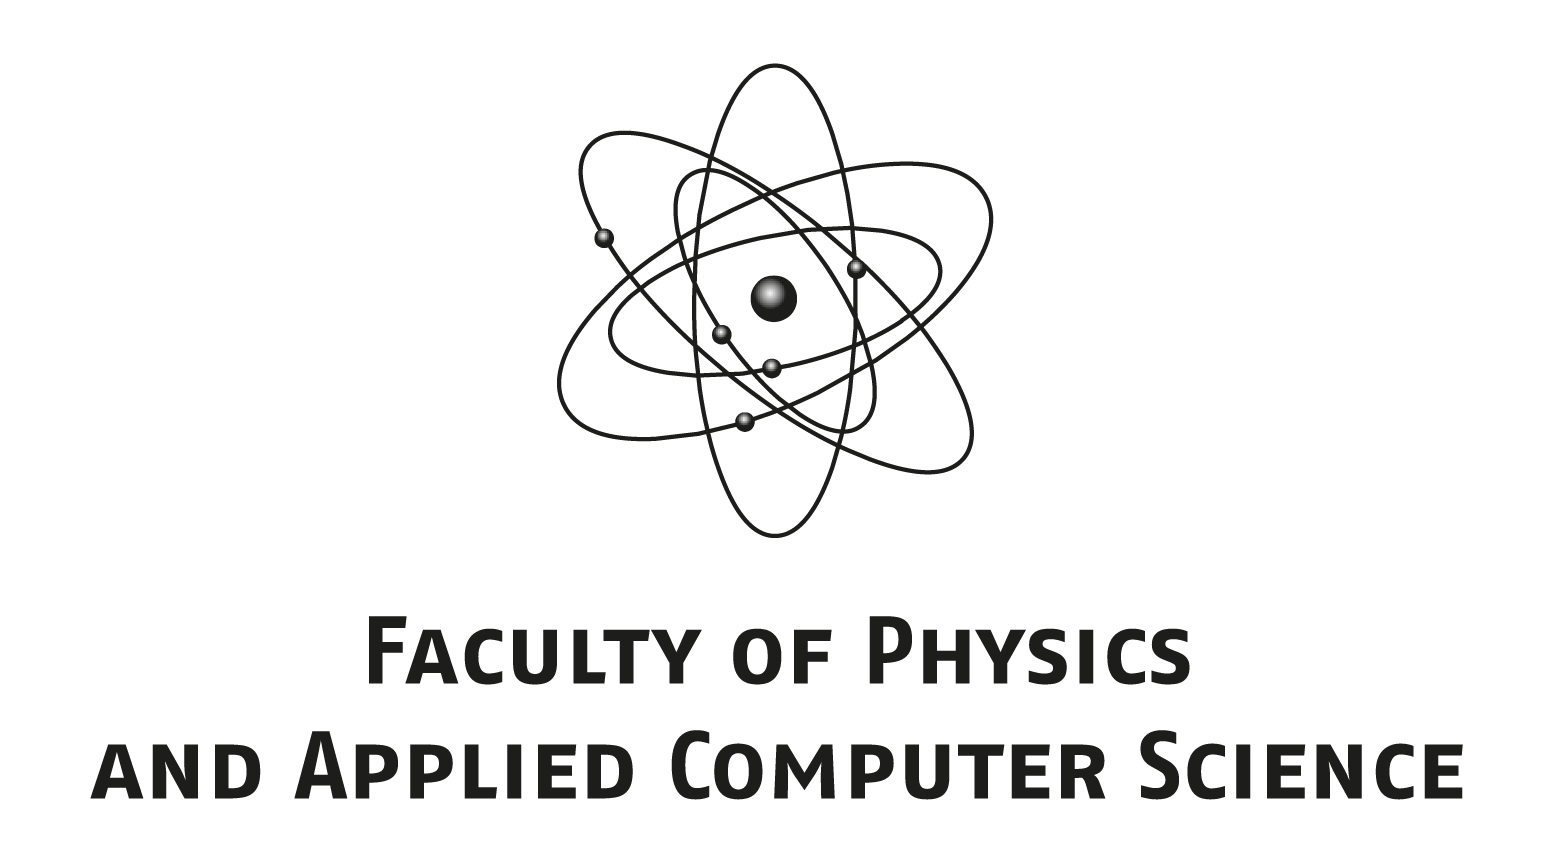 AGH-UST: Faculty of Physics and Applied Computer Science